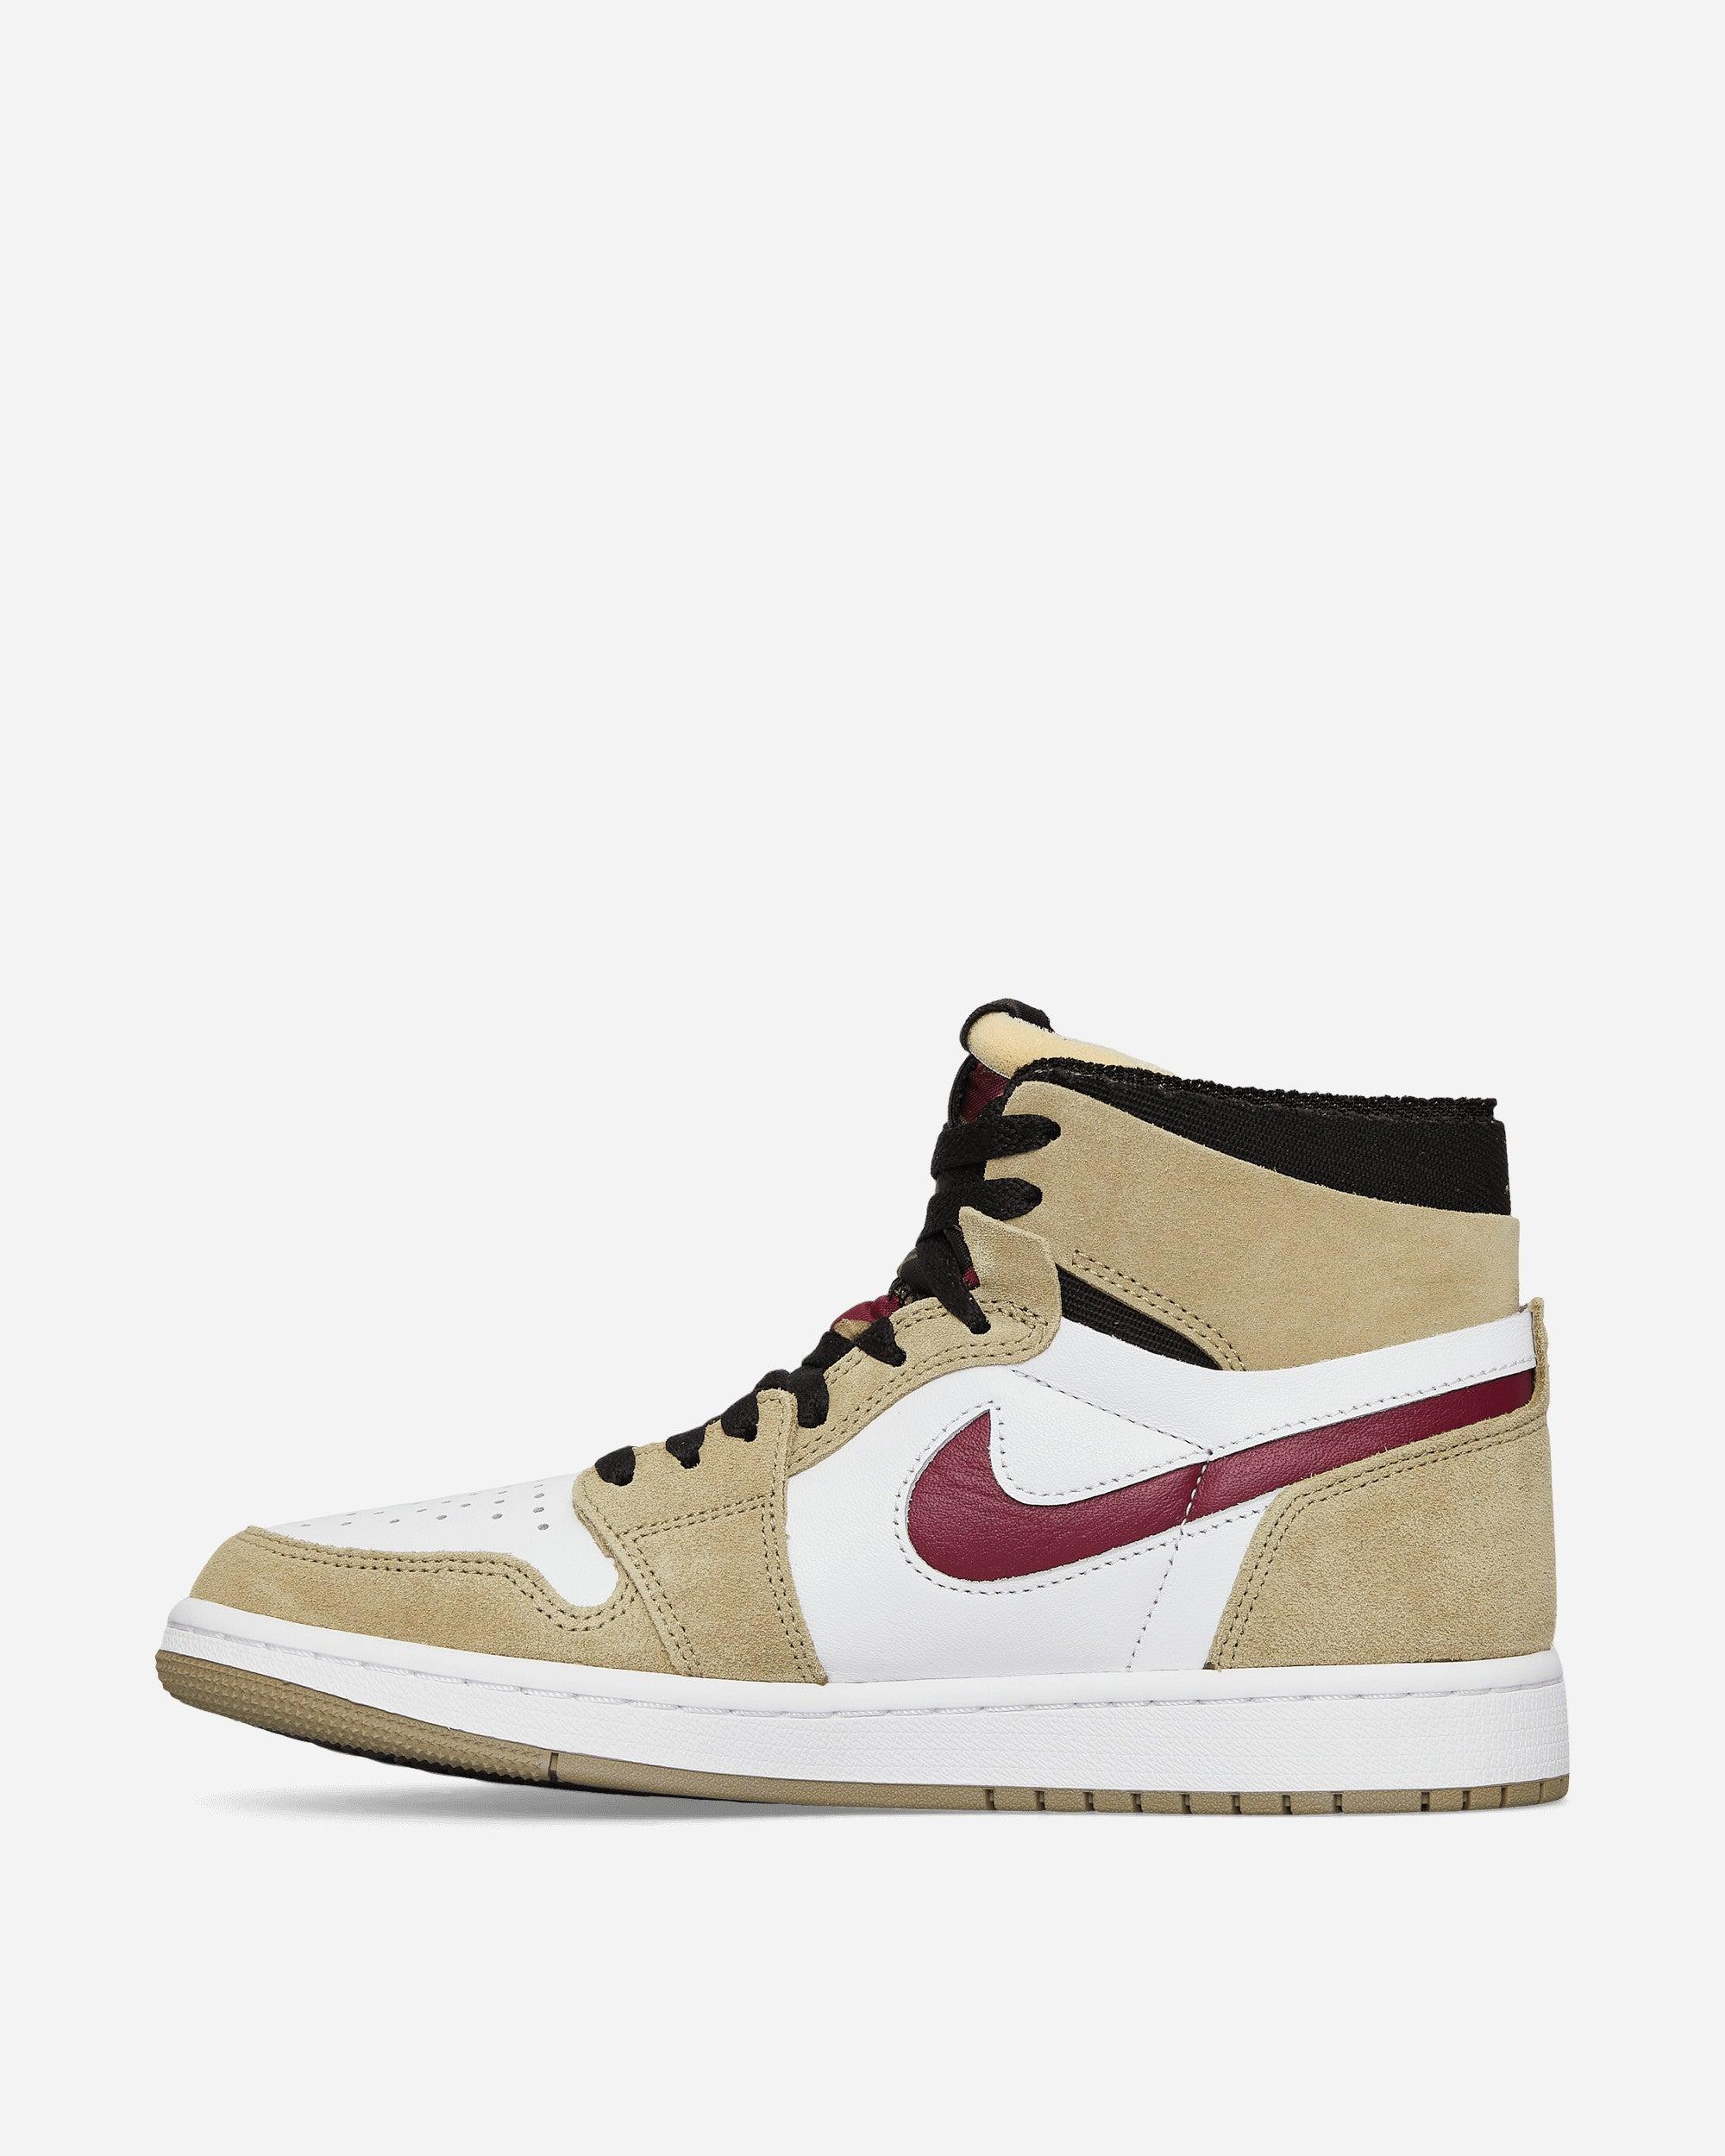 Nike Beige/Green Leather And Suede Air Jordan 1 Retro High Top